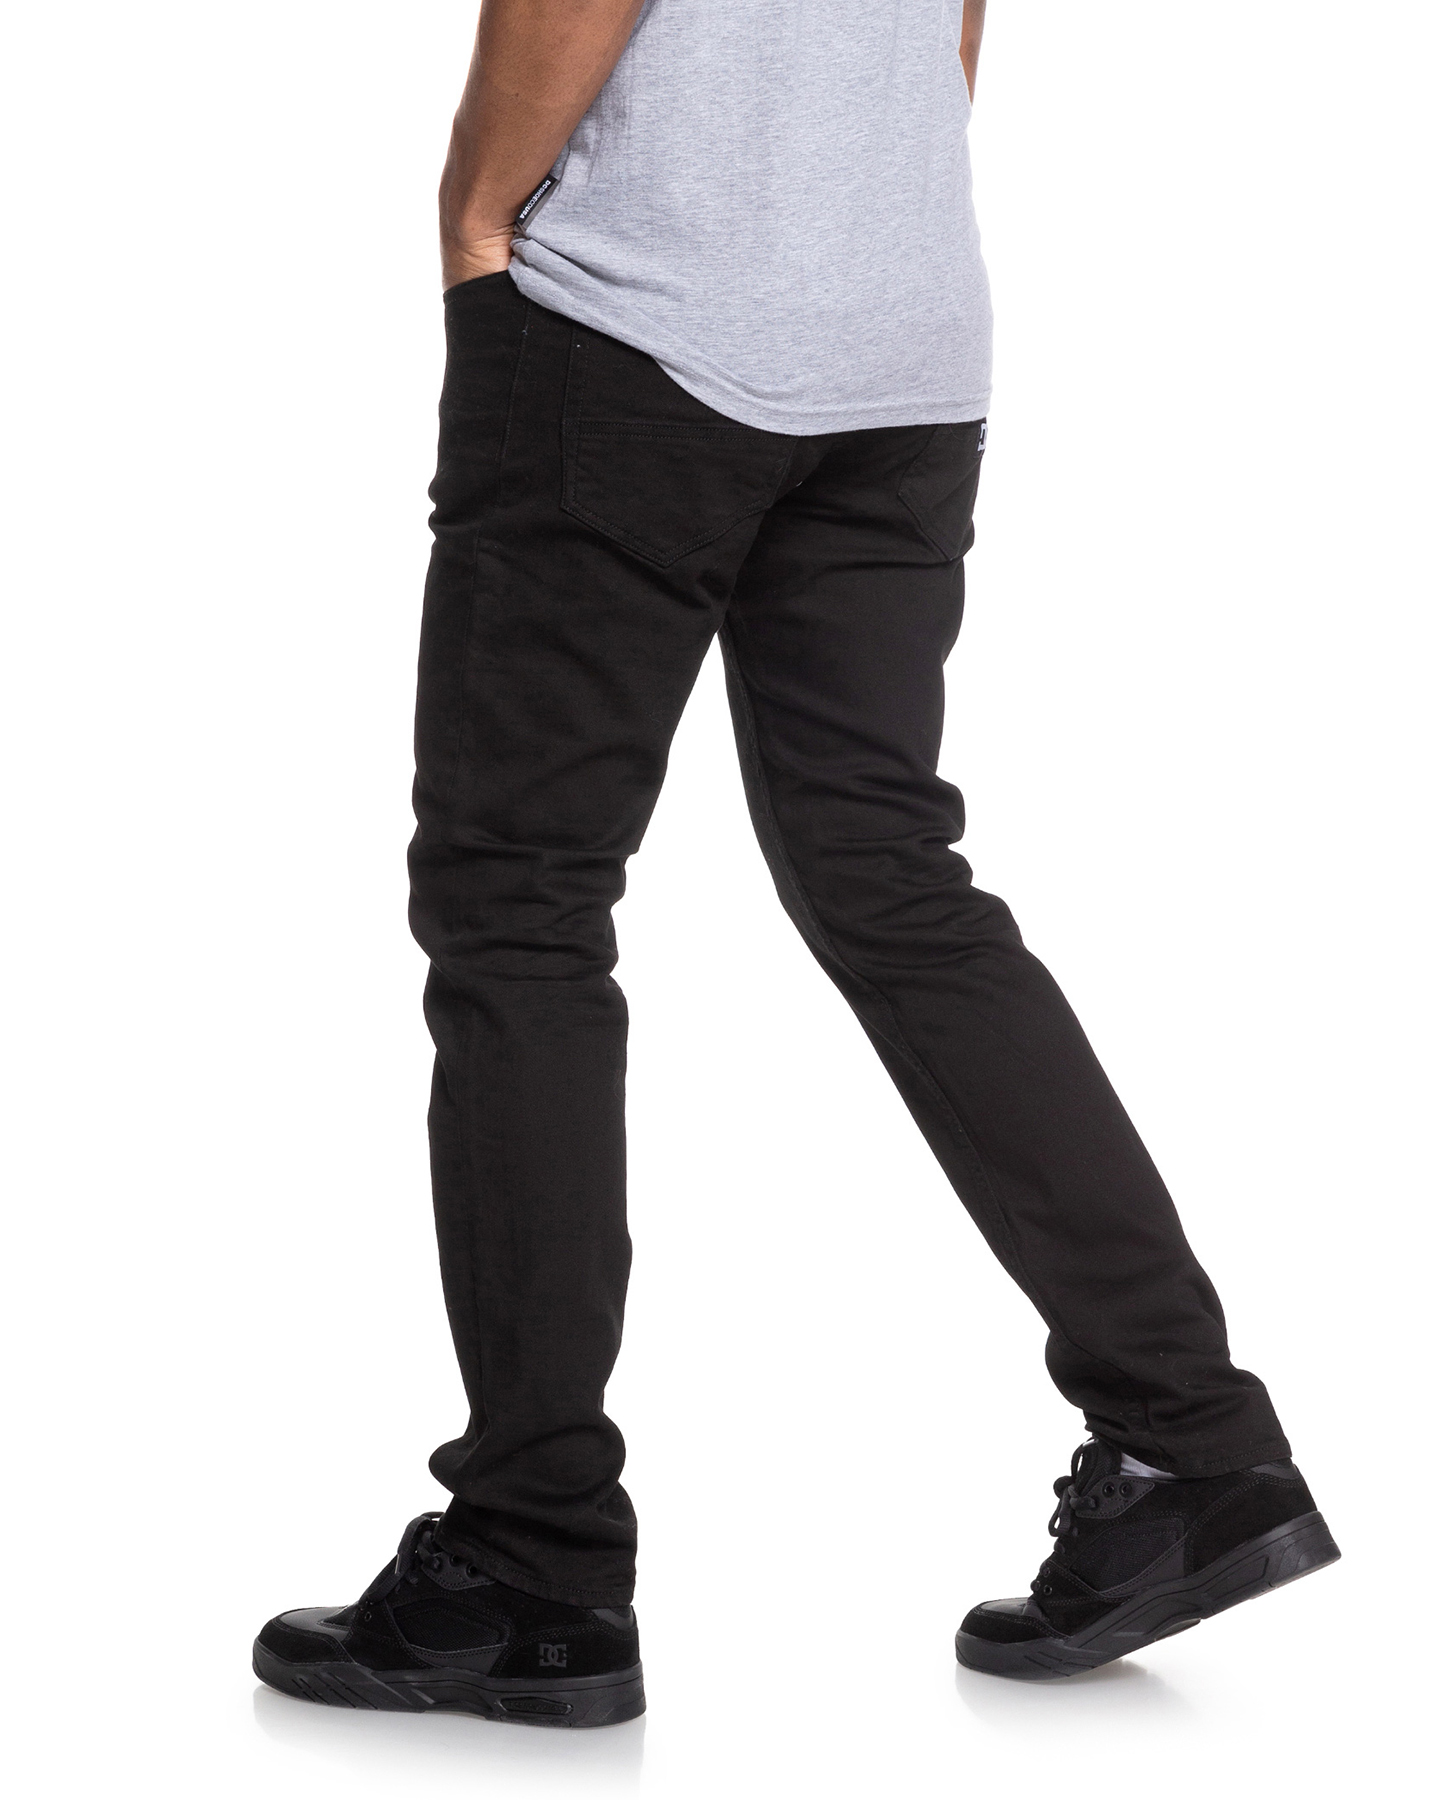 Dc Shoes Mens Worker Straight Fit Jeans - Black Rinse | SurfStitch